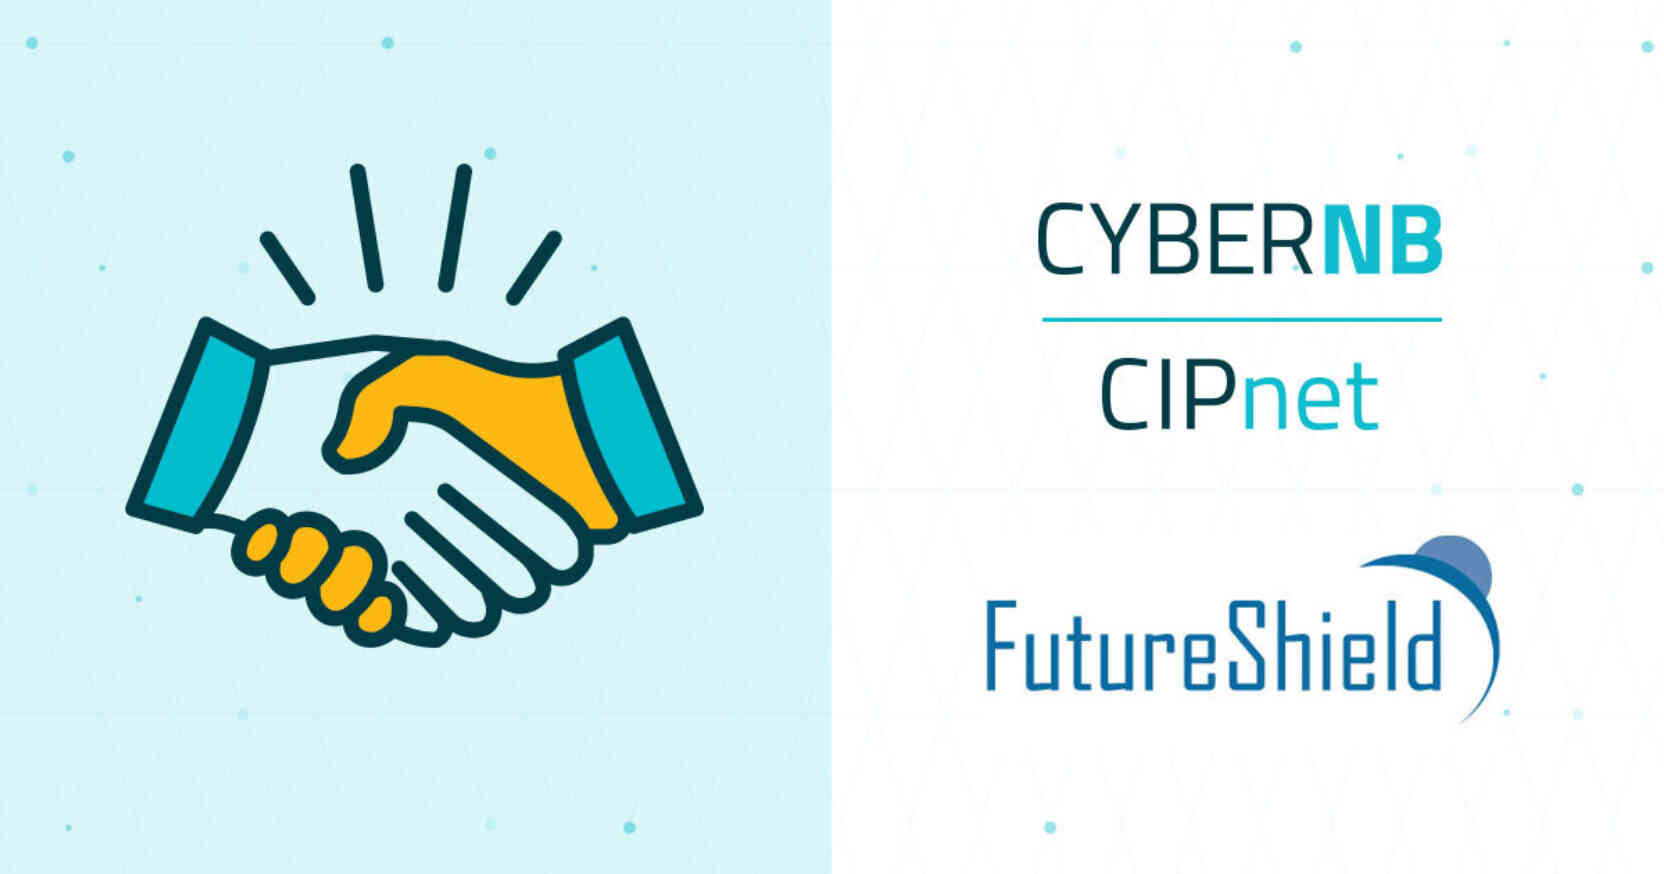 CyberNB Leads the Way Building the Next Generation Cyber Security Leaders